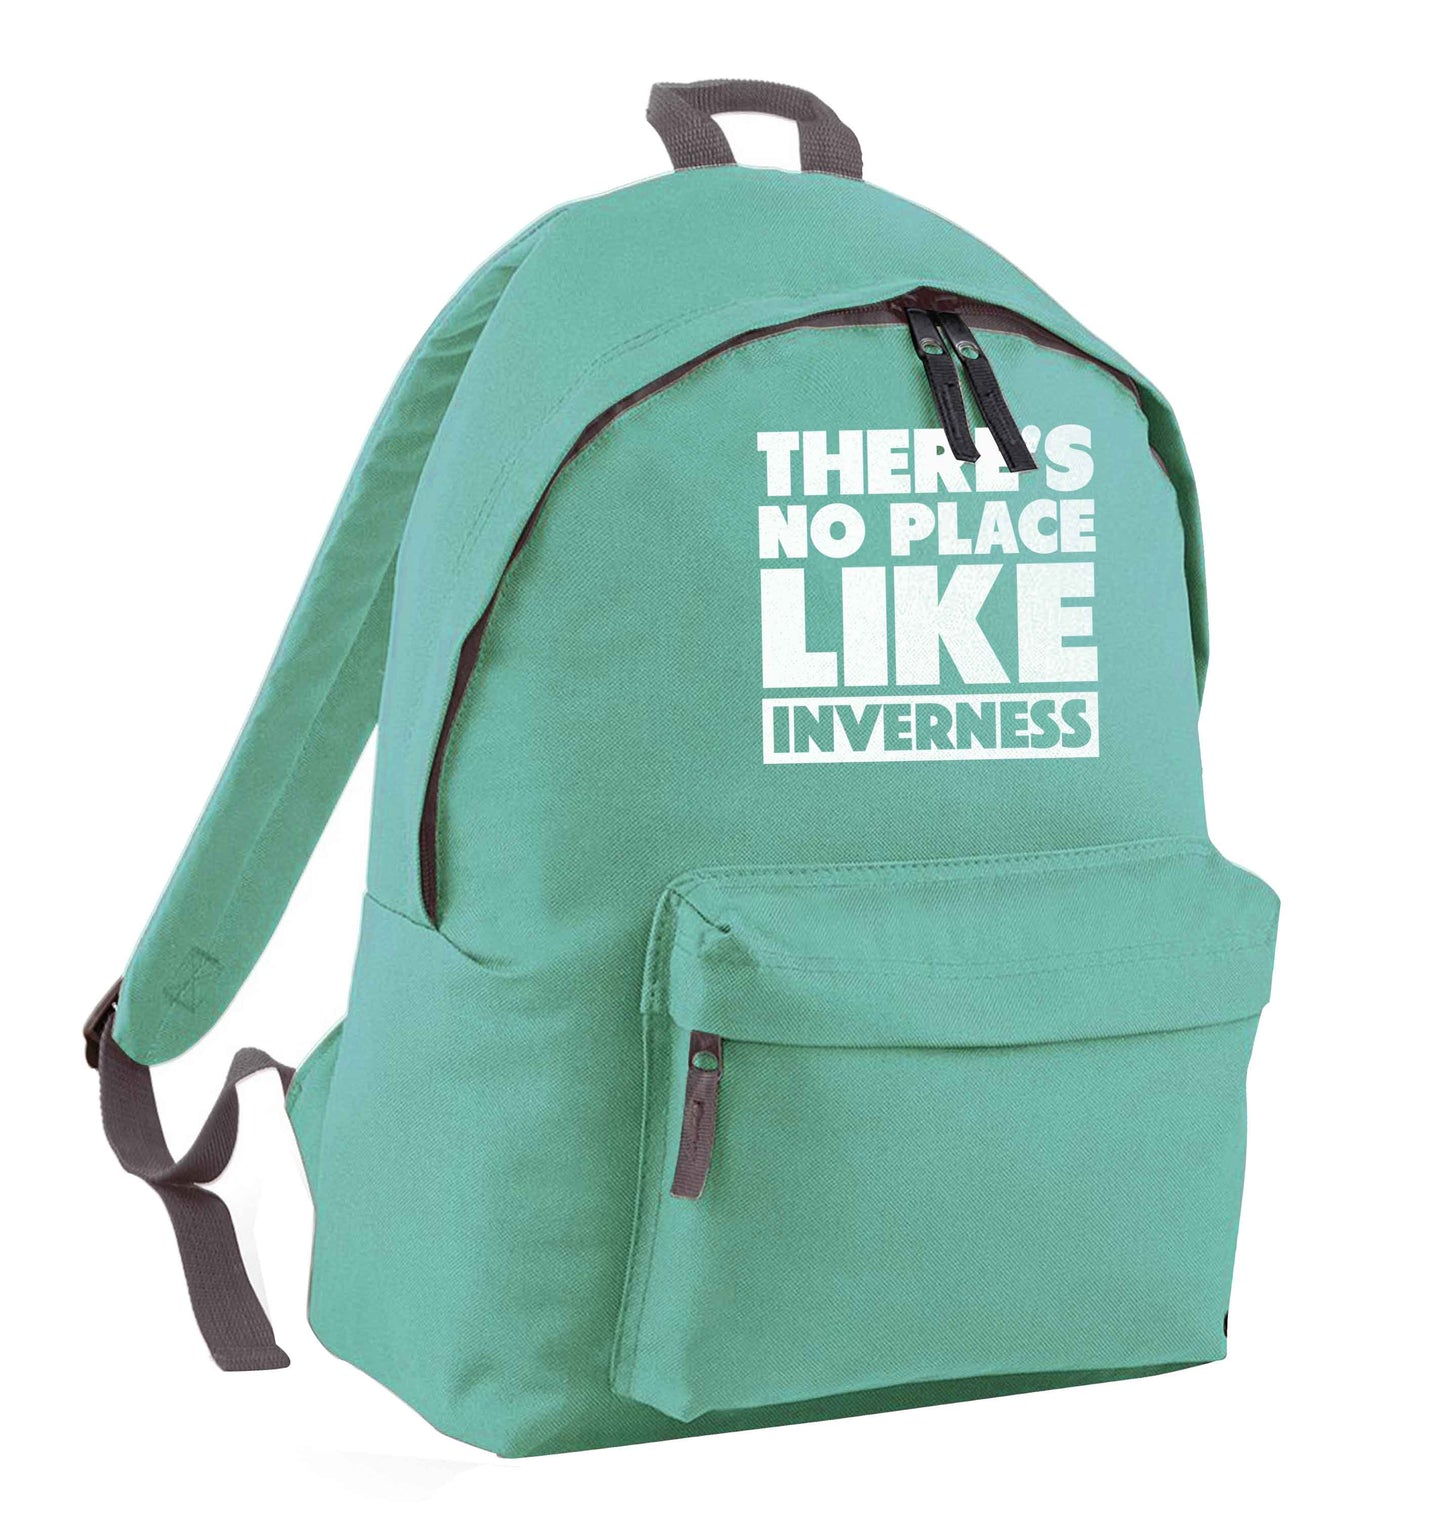 There's no place like Inverness mint adults backpack